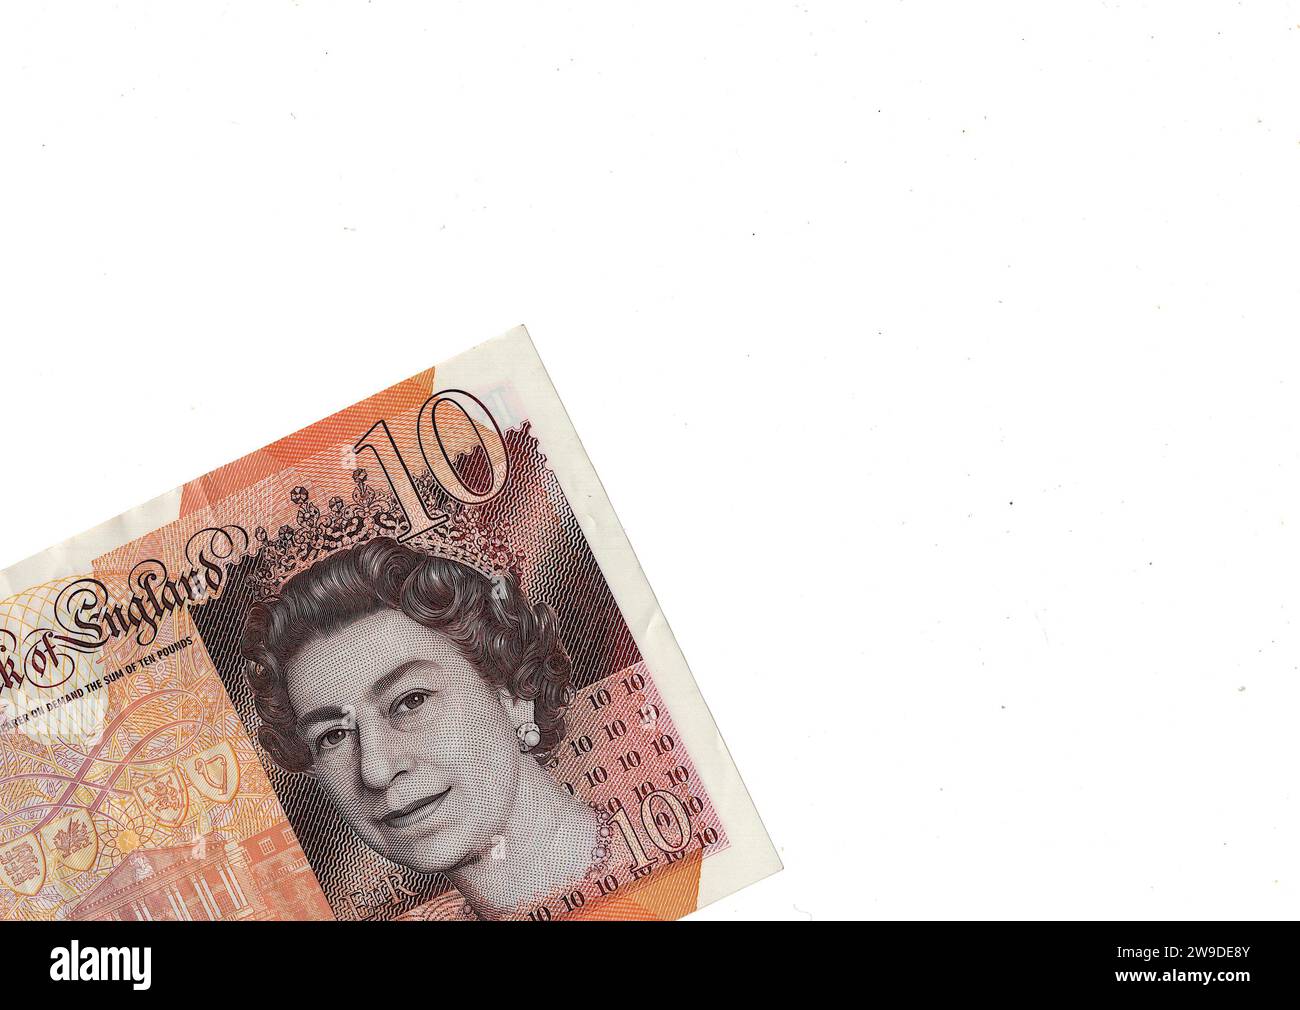 Close up of a ten pound note featuring a portrait of Queen Elizabeth II  from the United Kingdom/Great Britain on a white background. Stock Photo